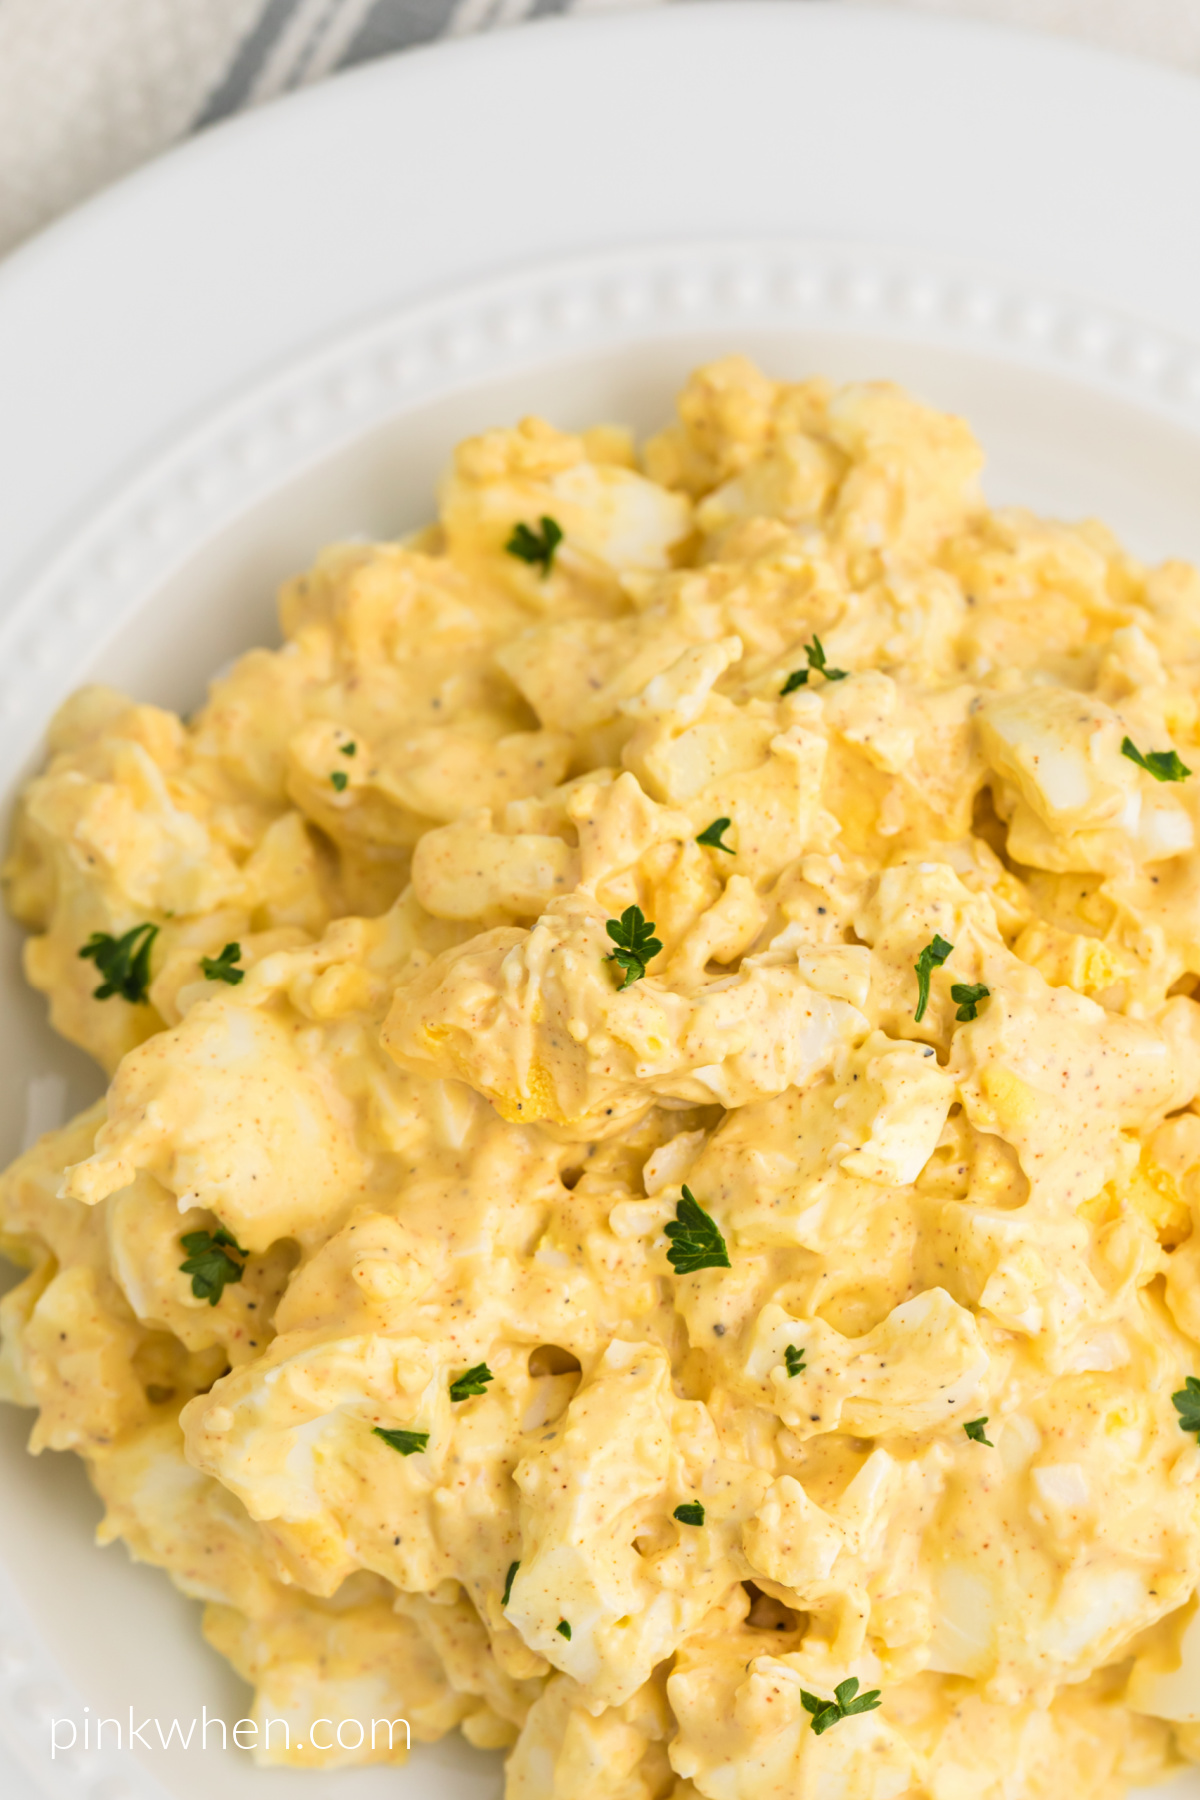 Classic egg salad in a white bowl ready to serve.